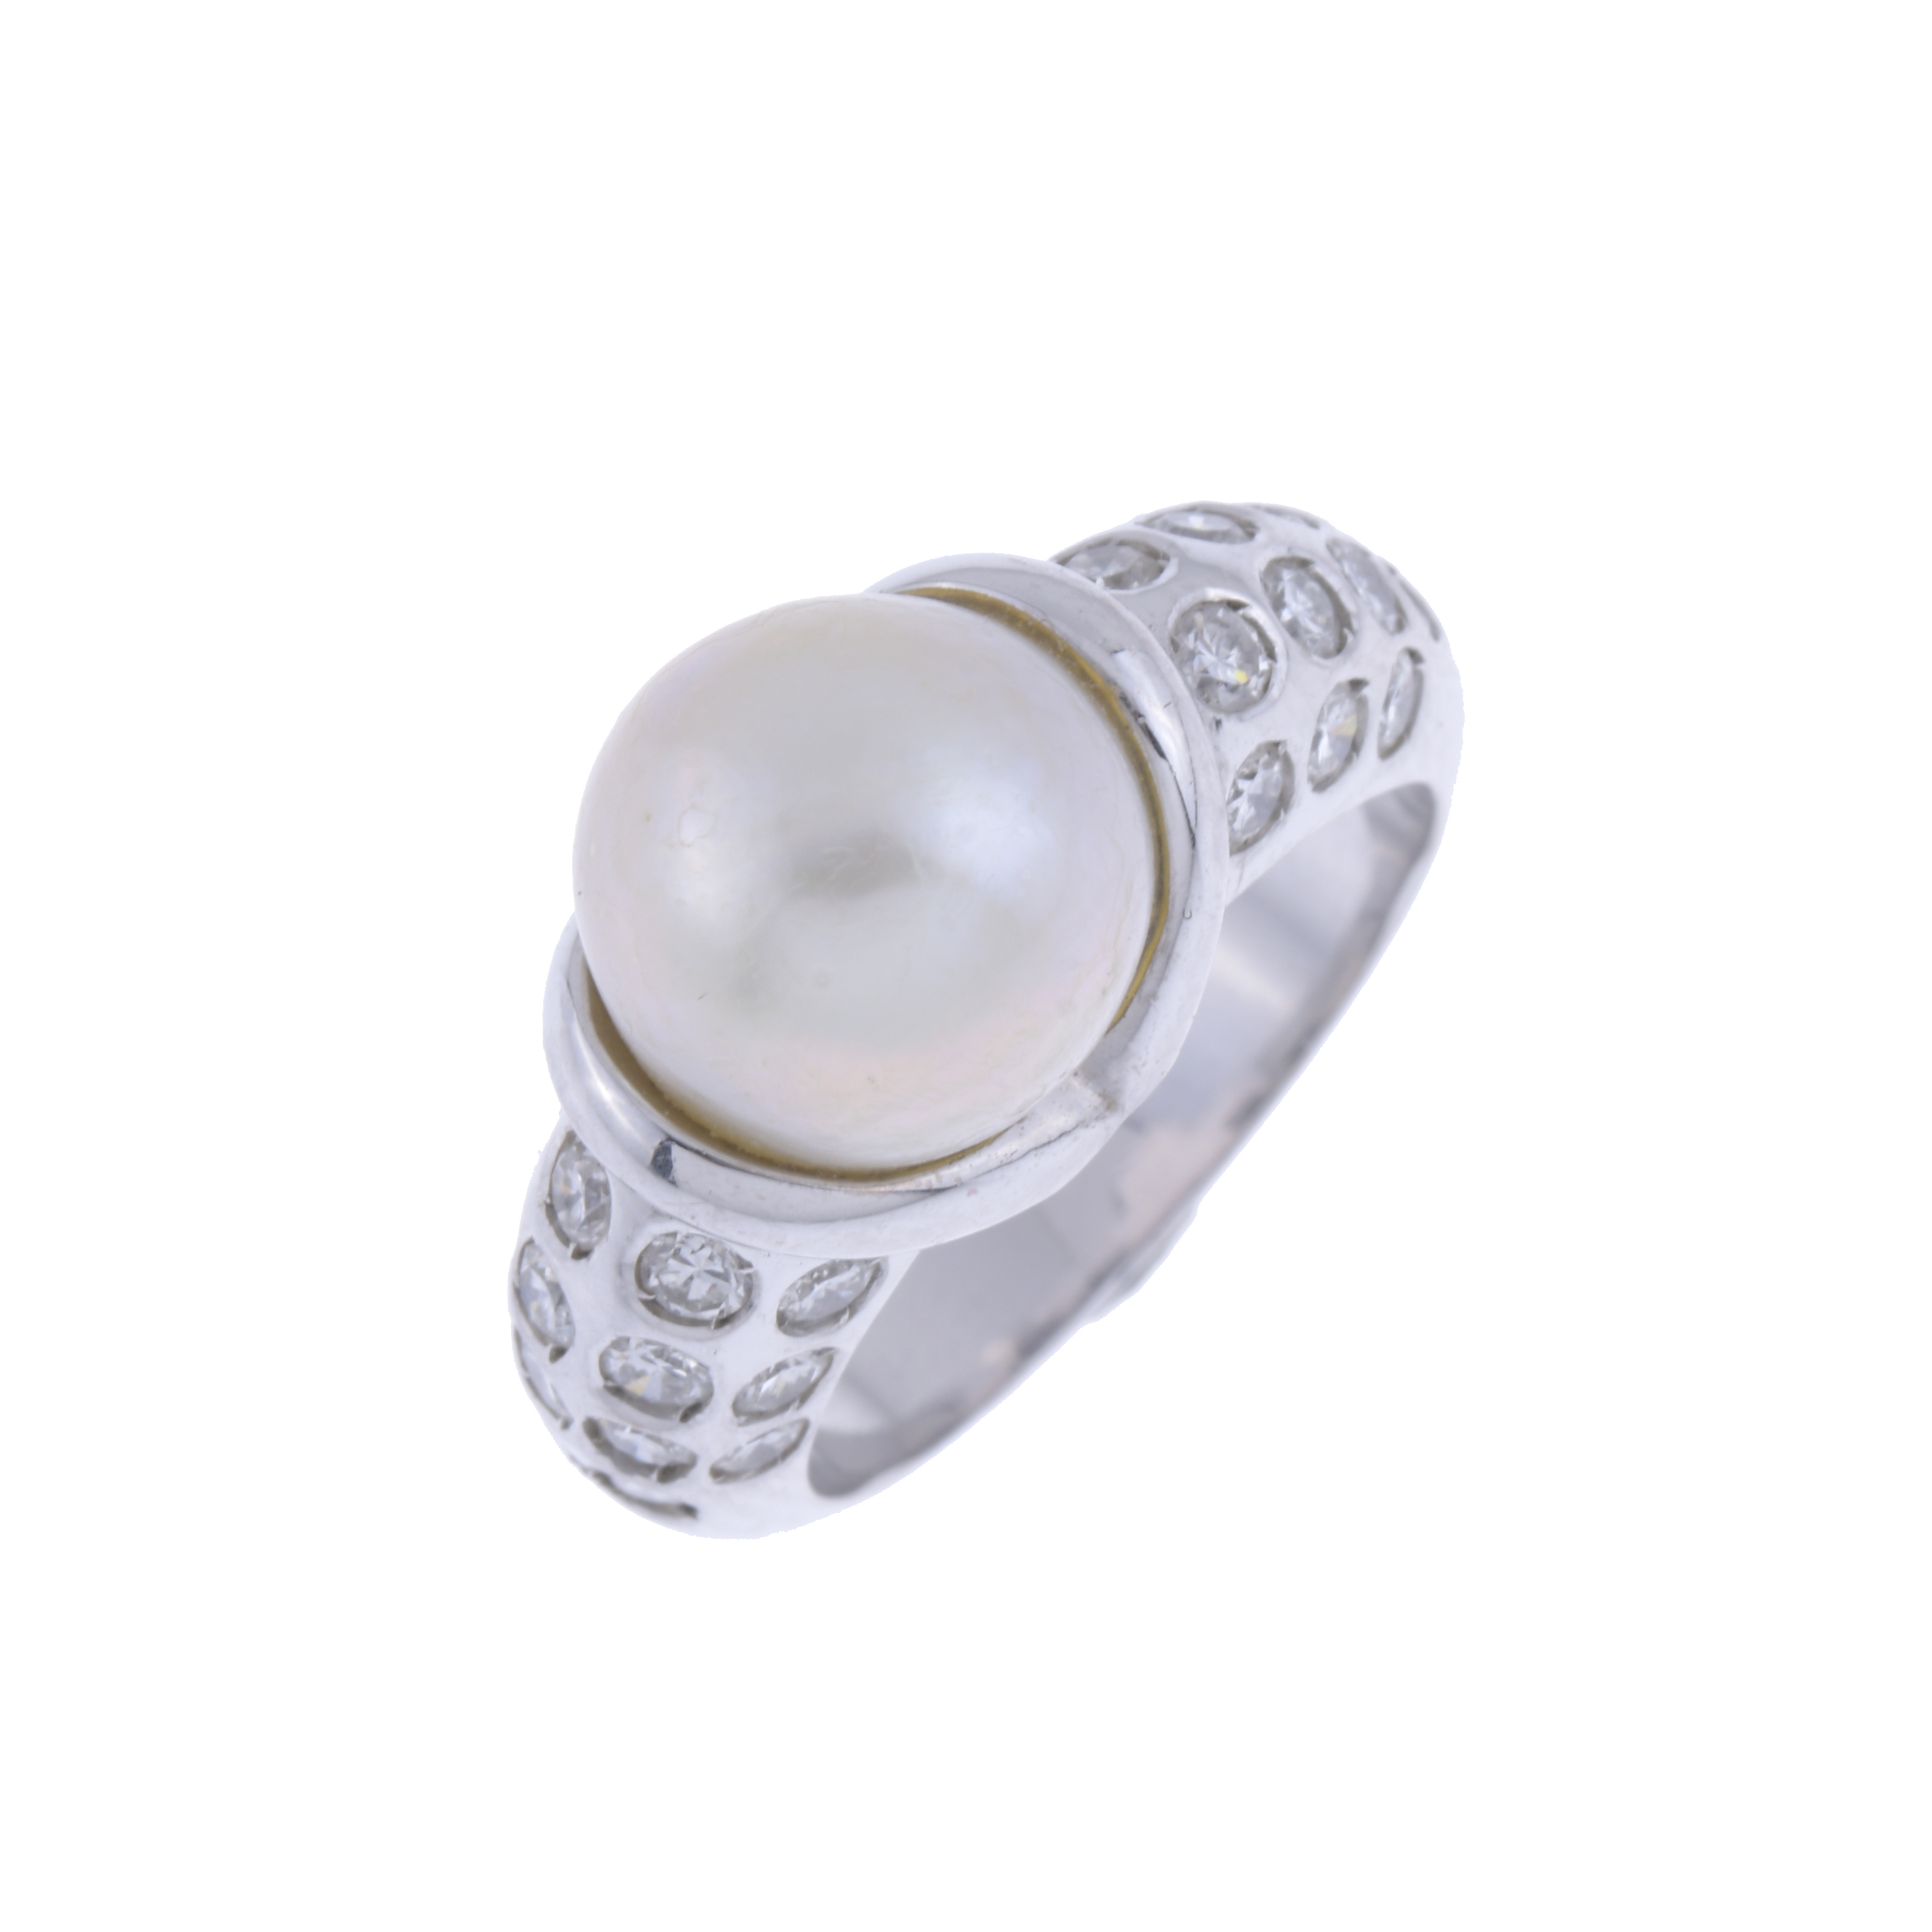 PEARL AND DIAMONDS RING.